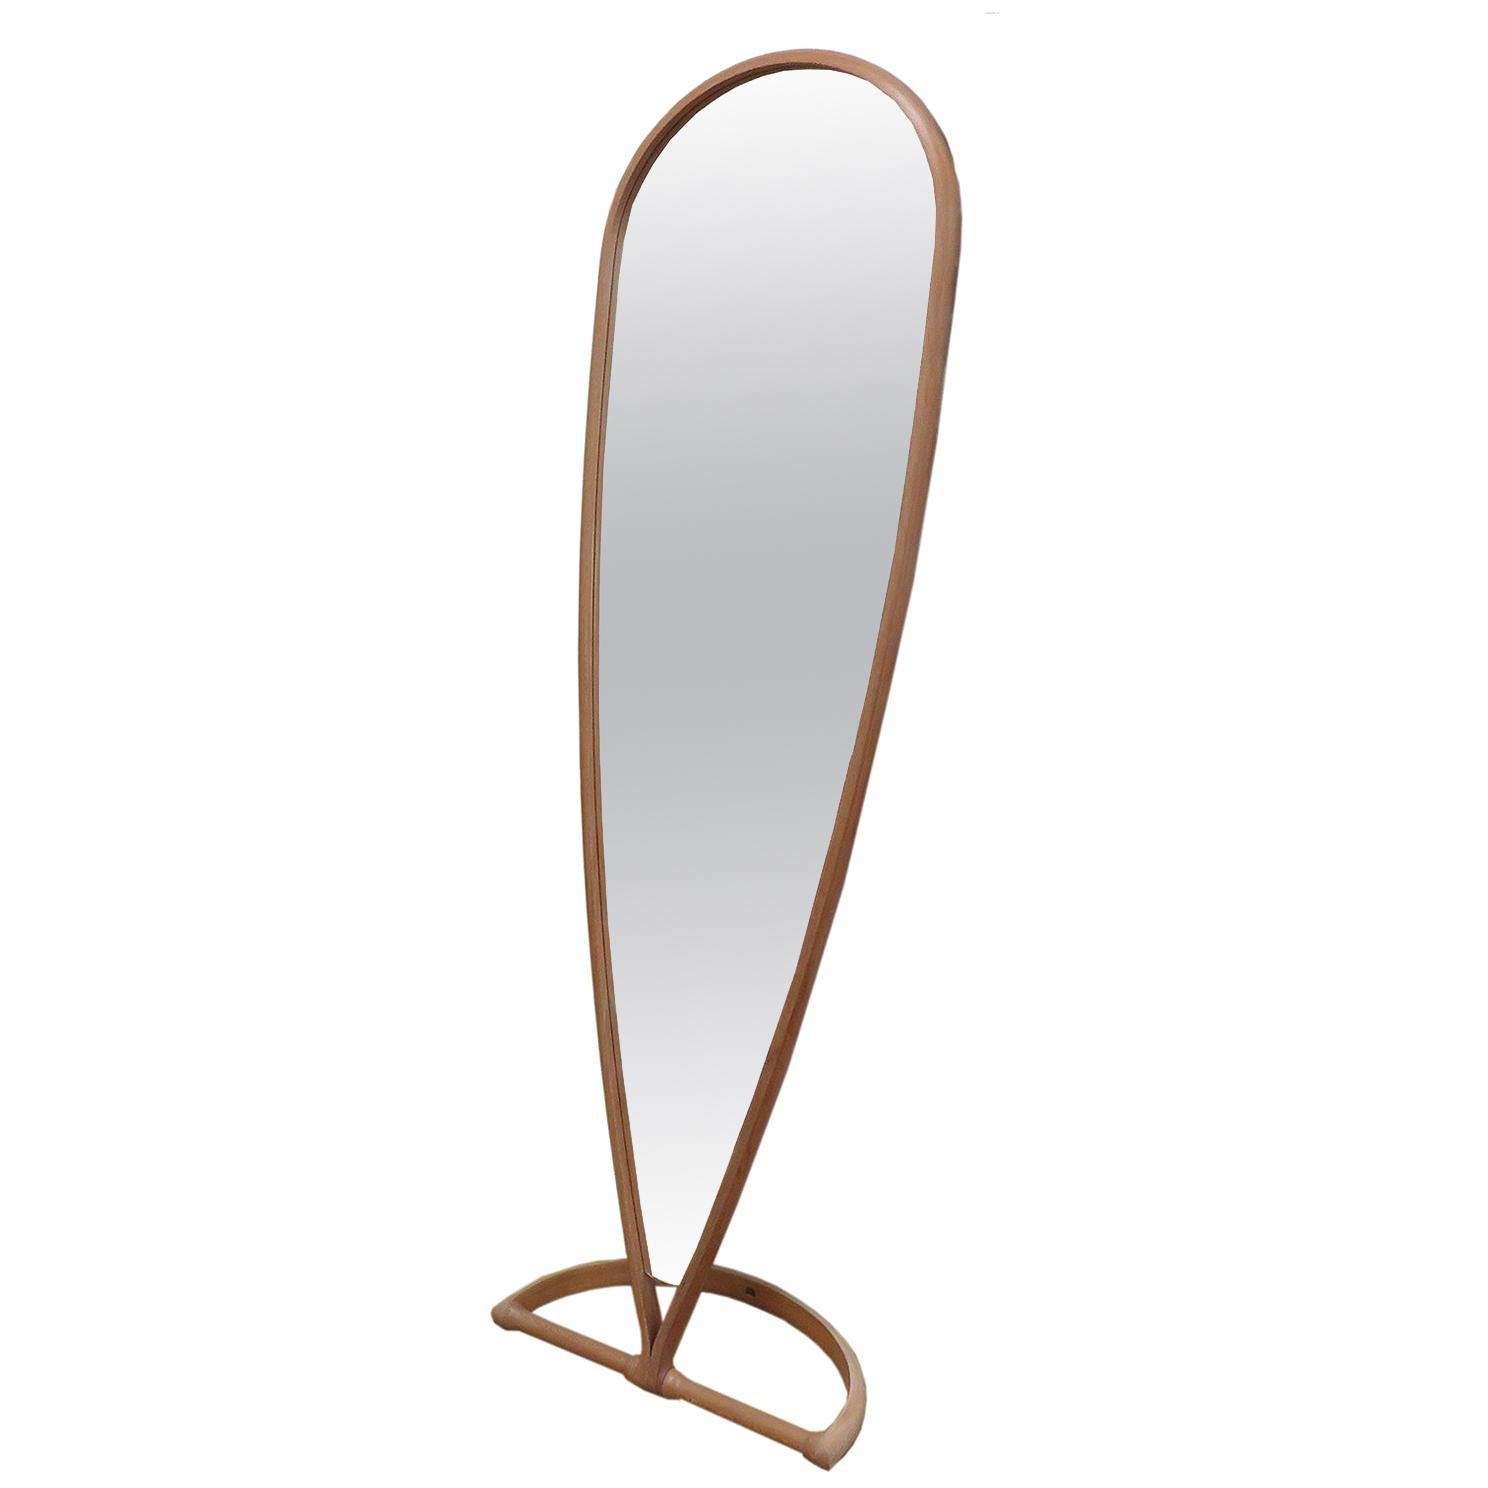 Contemporary curved teardrop shape full-length mirror made in London Plane wood For Sale